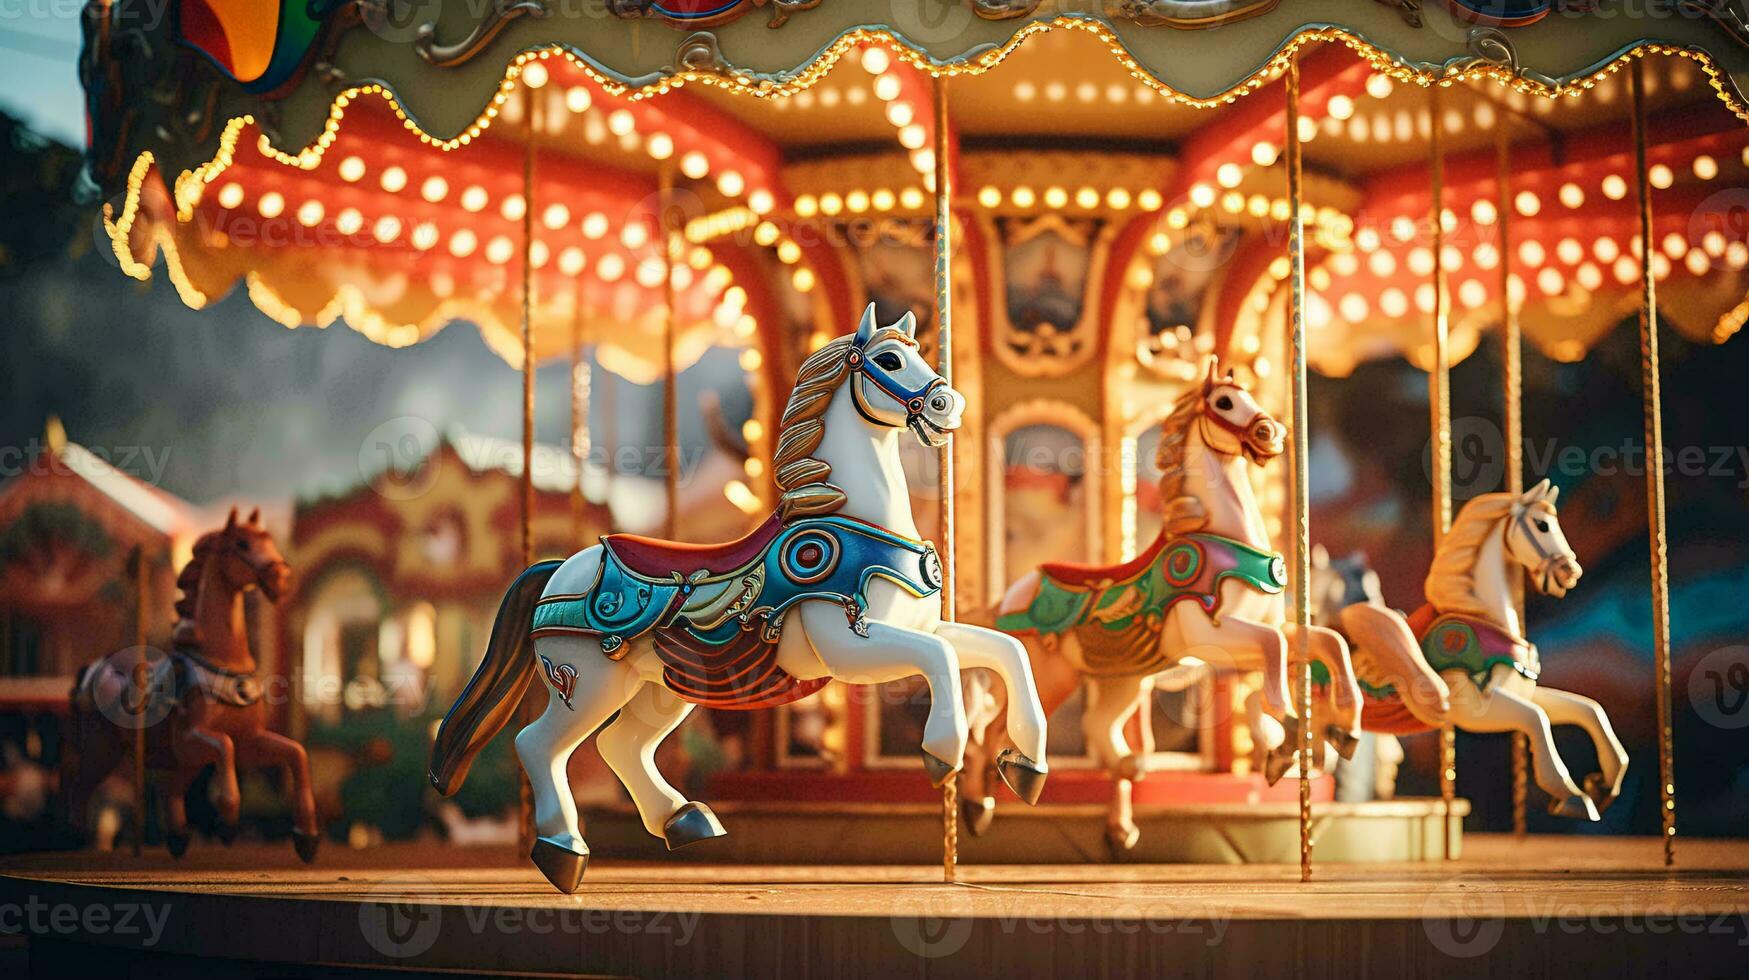 A colorful carousel with beautifully decorated horses spinning in